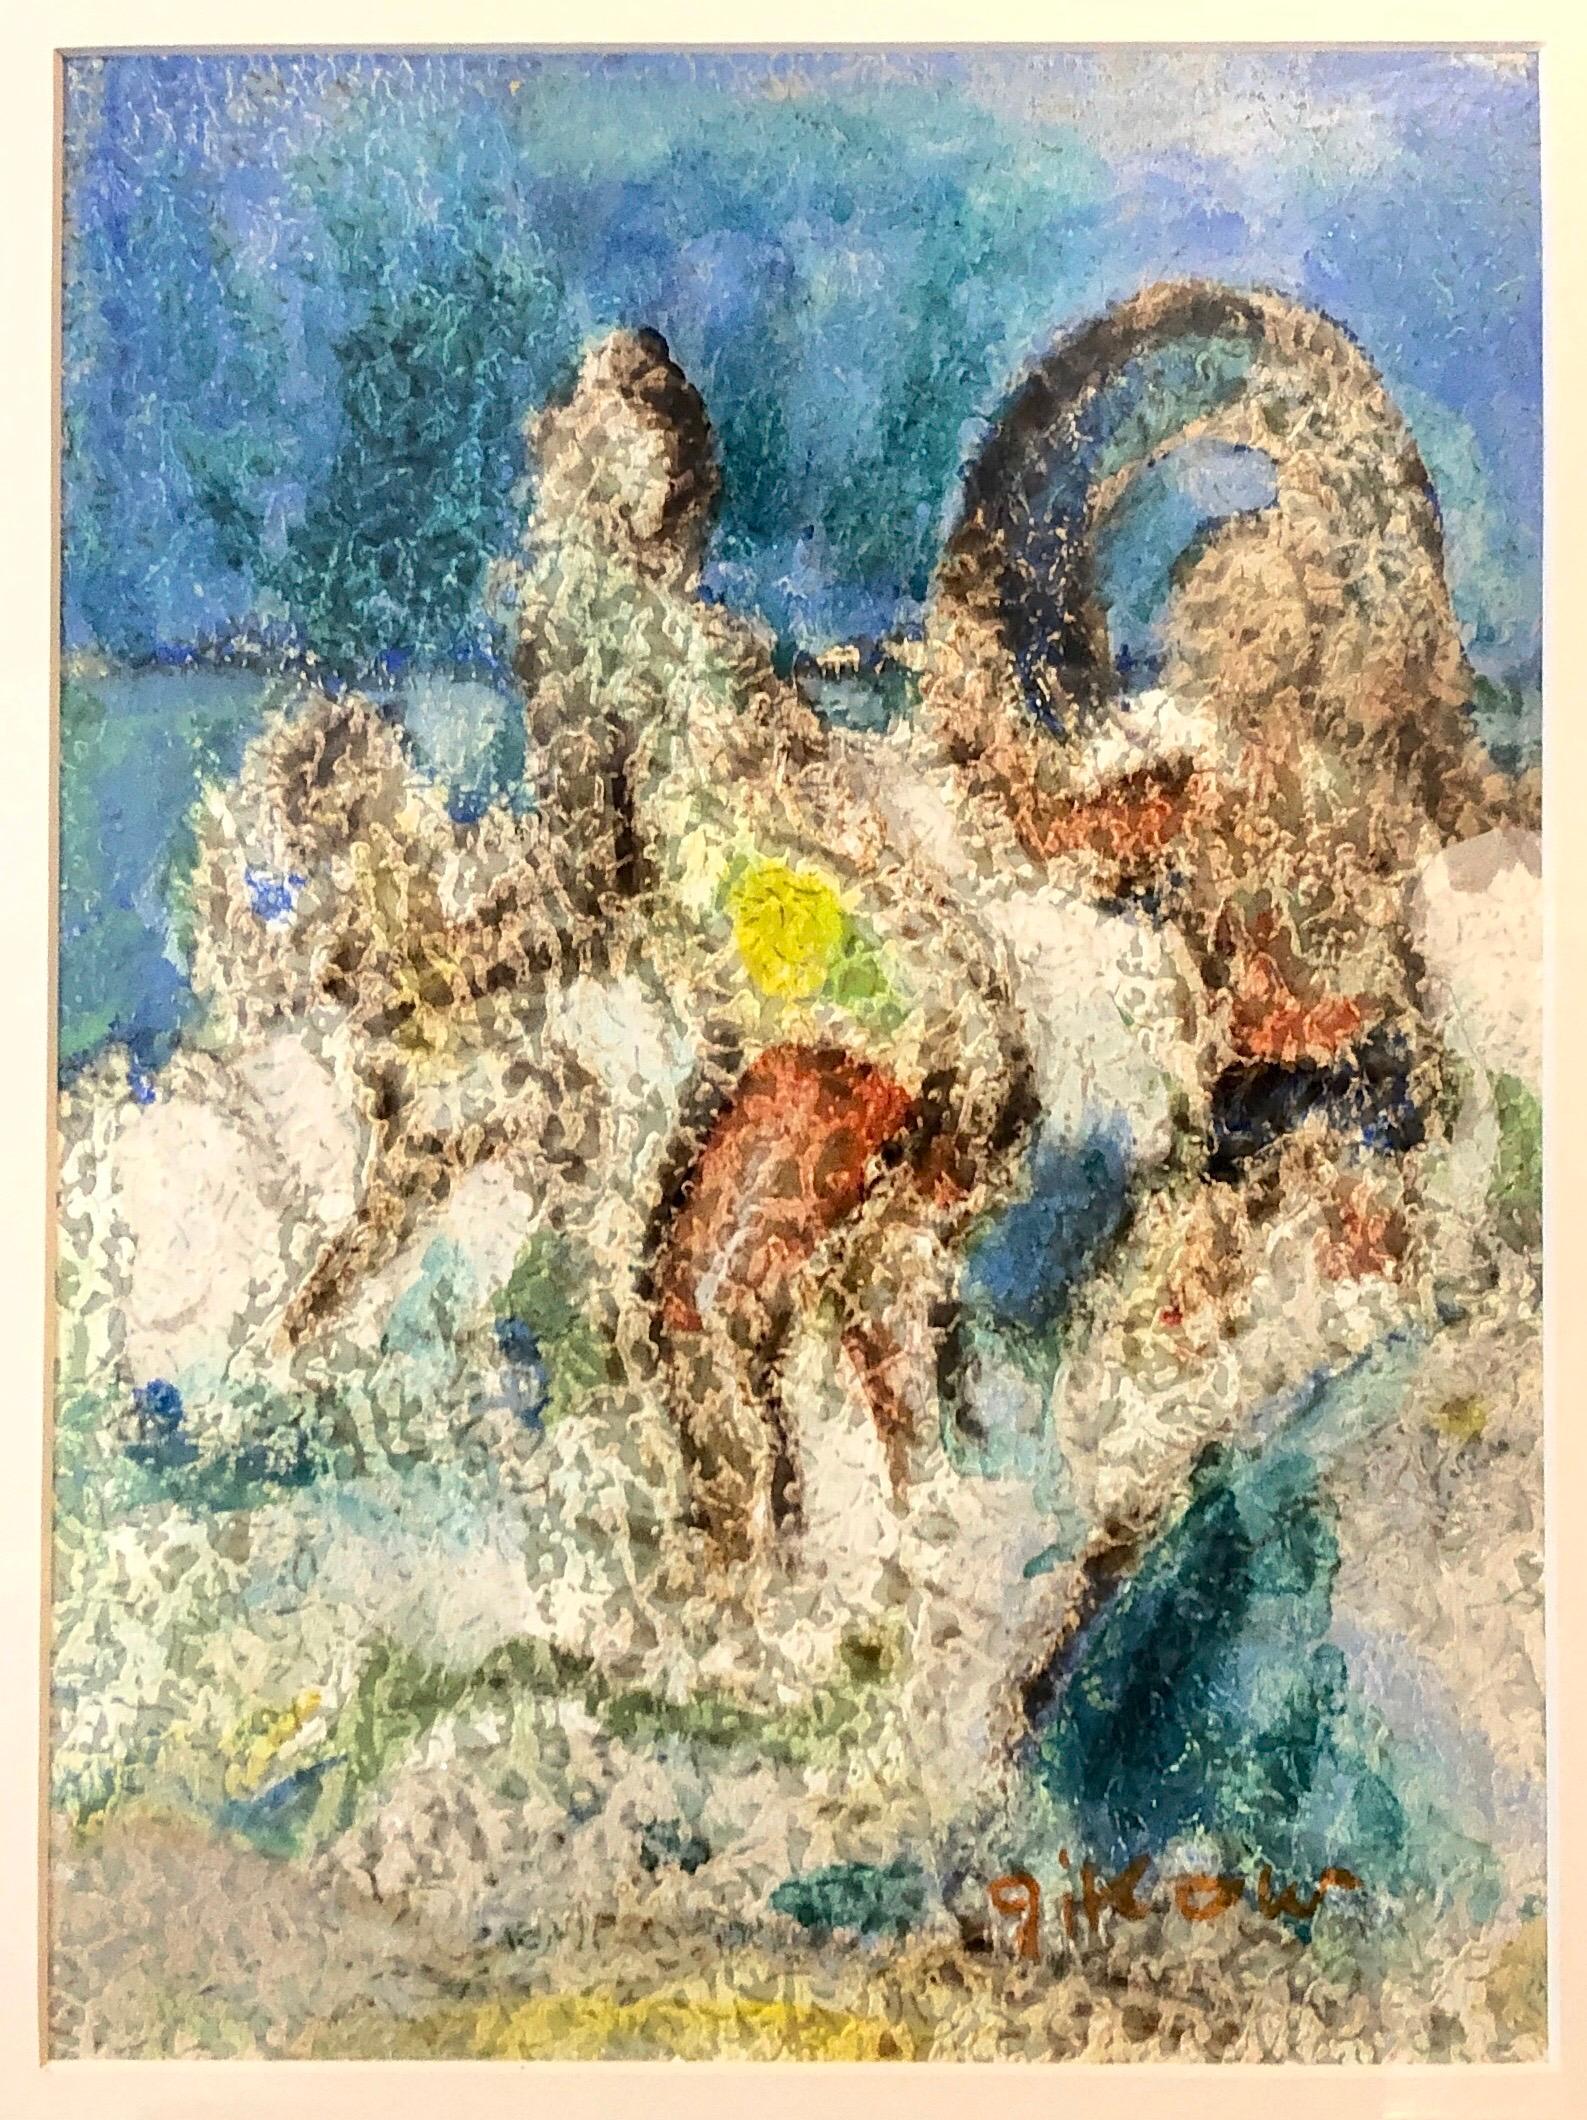 Modernist beach scene; signed lower right; image size is 11.5 x 8.5 inches, framed it measures 

Ruth Gikow (January 6, 1915 Ukraine - 1982 New York City) was an Important American Jewish woman visual artist known primarily for her work as a genre